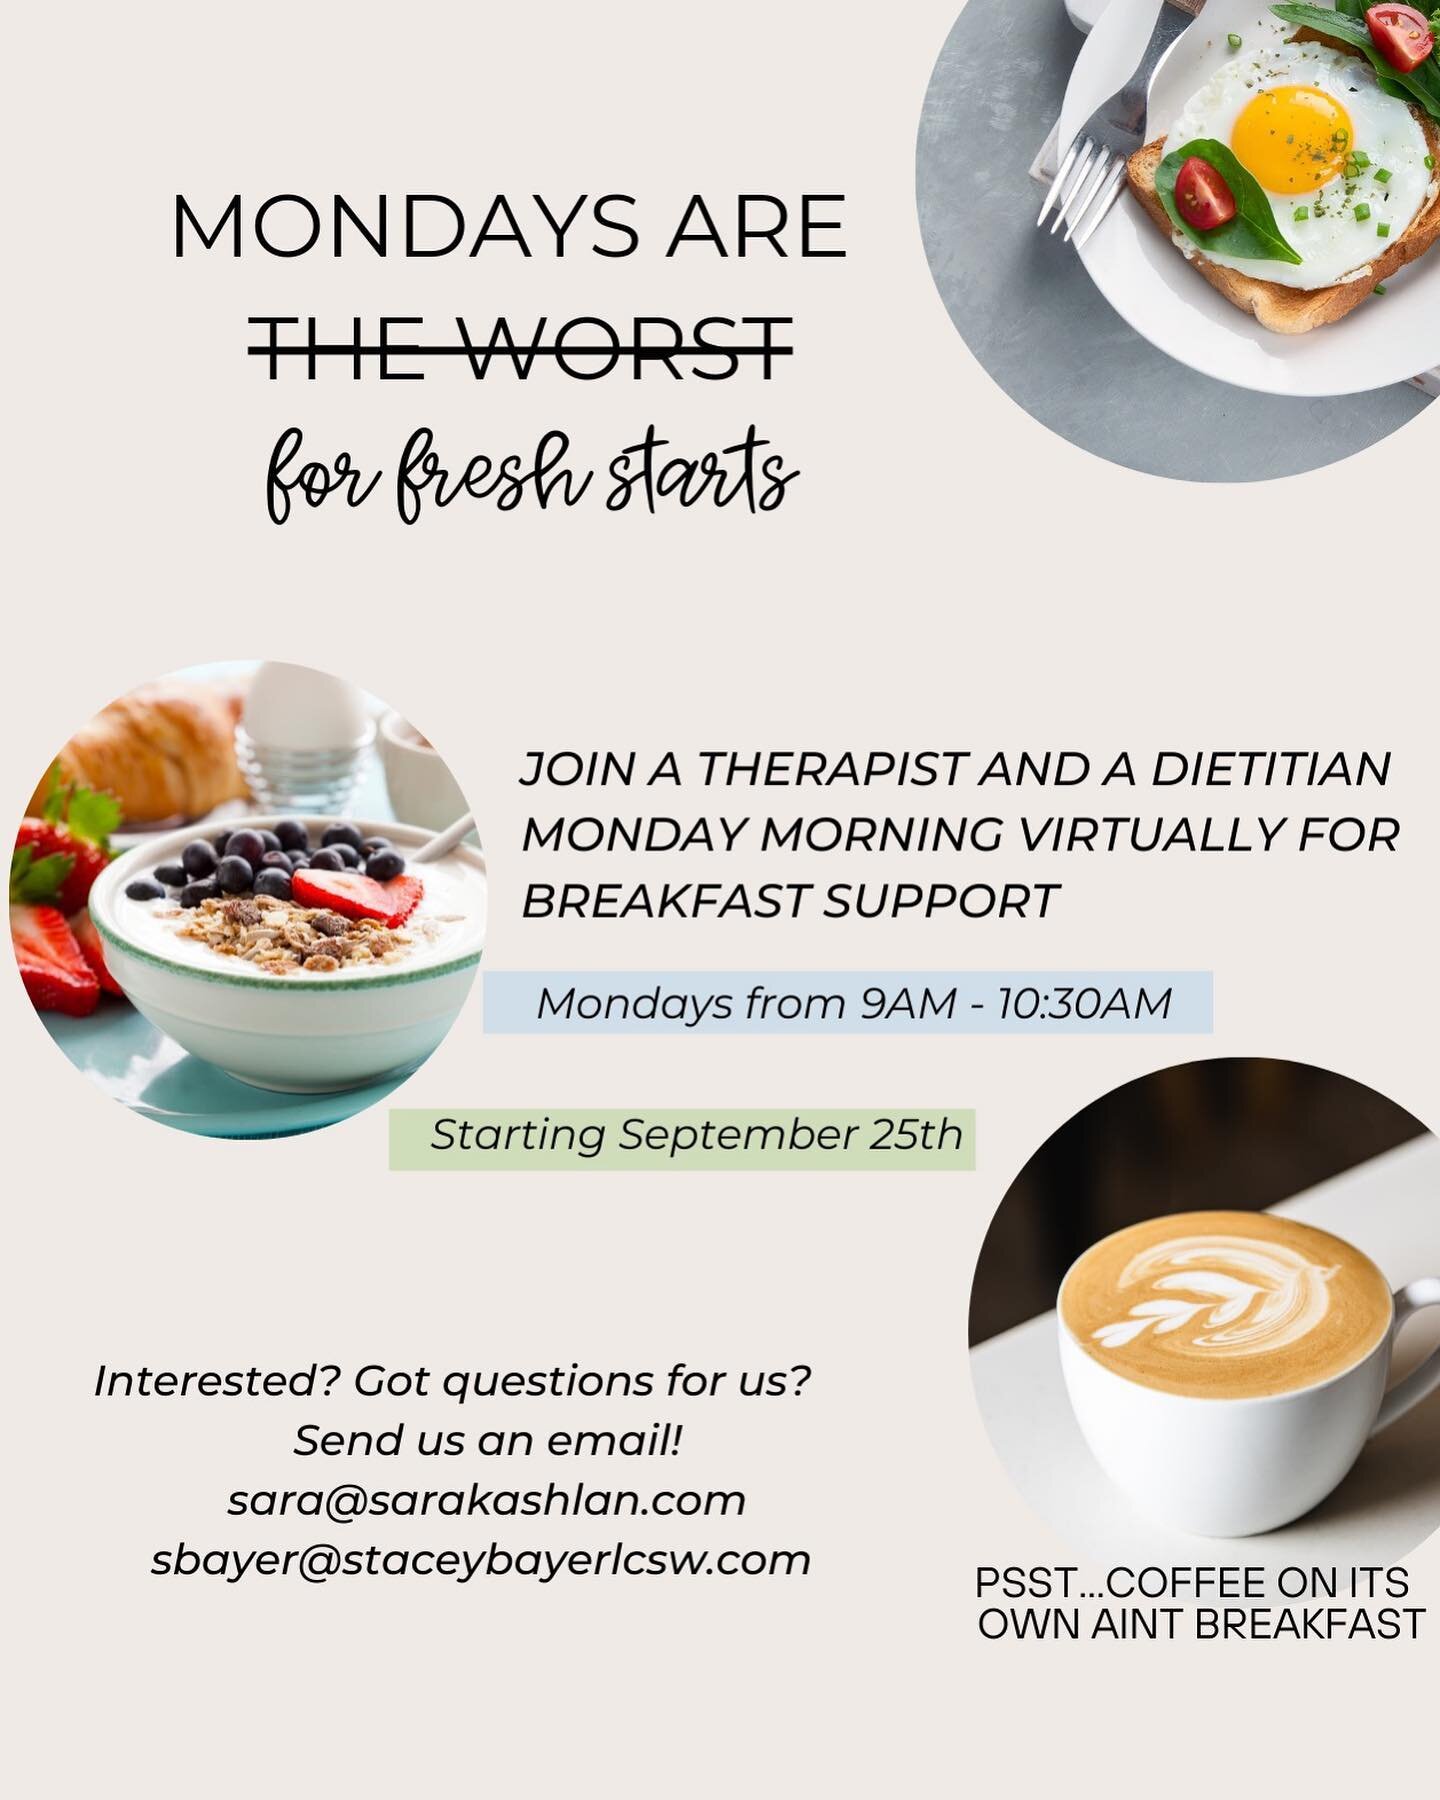 Happy Monday! I am excited to share that Sara Kashlan (ED dietitian) and I will be starting a meal support group for adults residing in CA who are in recovery from an eating disorder beginning September 25th (6-week rounds)! 

- This virtual group wi